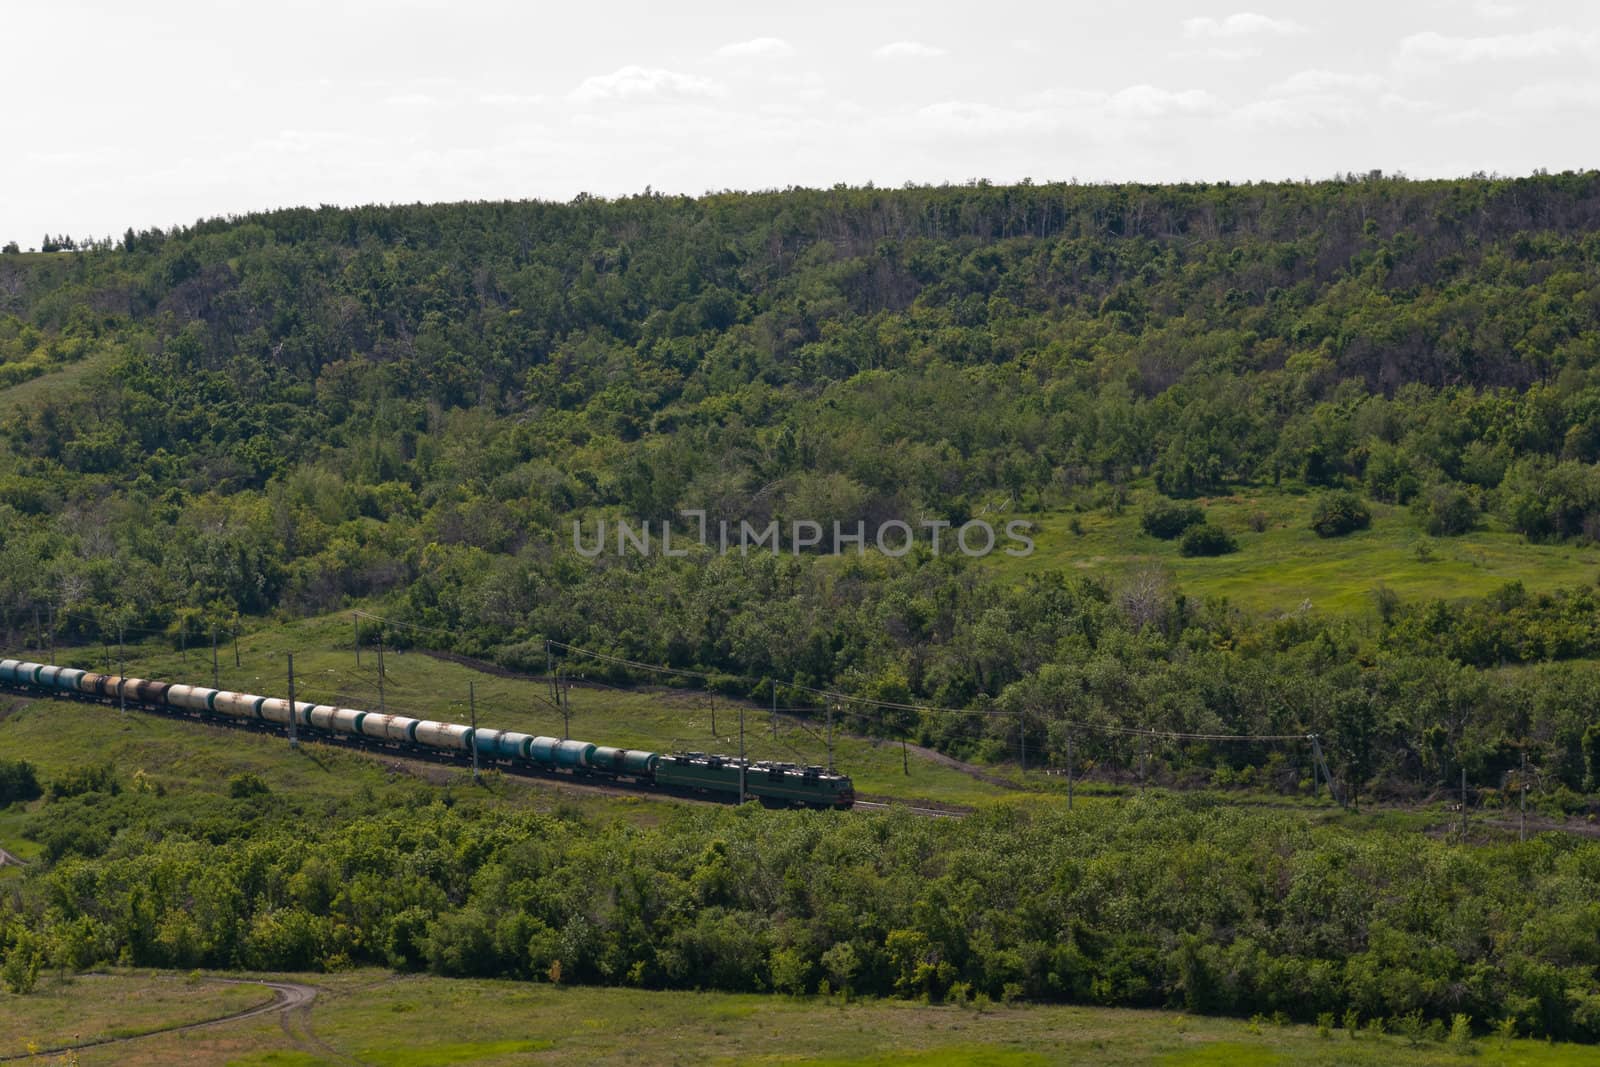 Freight Train Going by Railway Against Summer Landscape